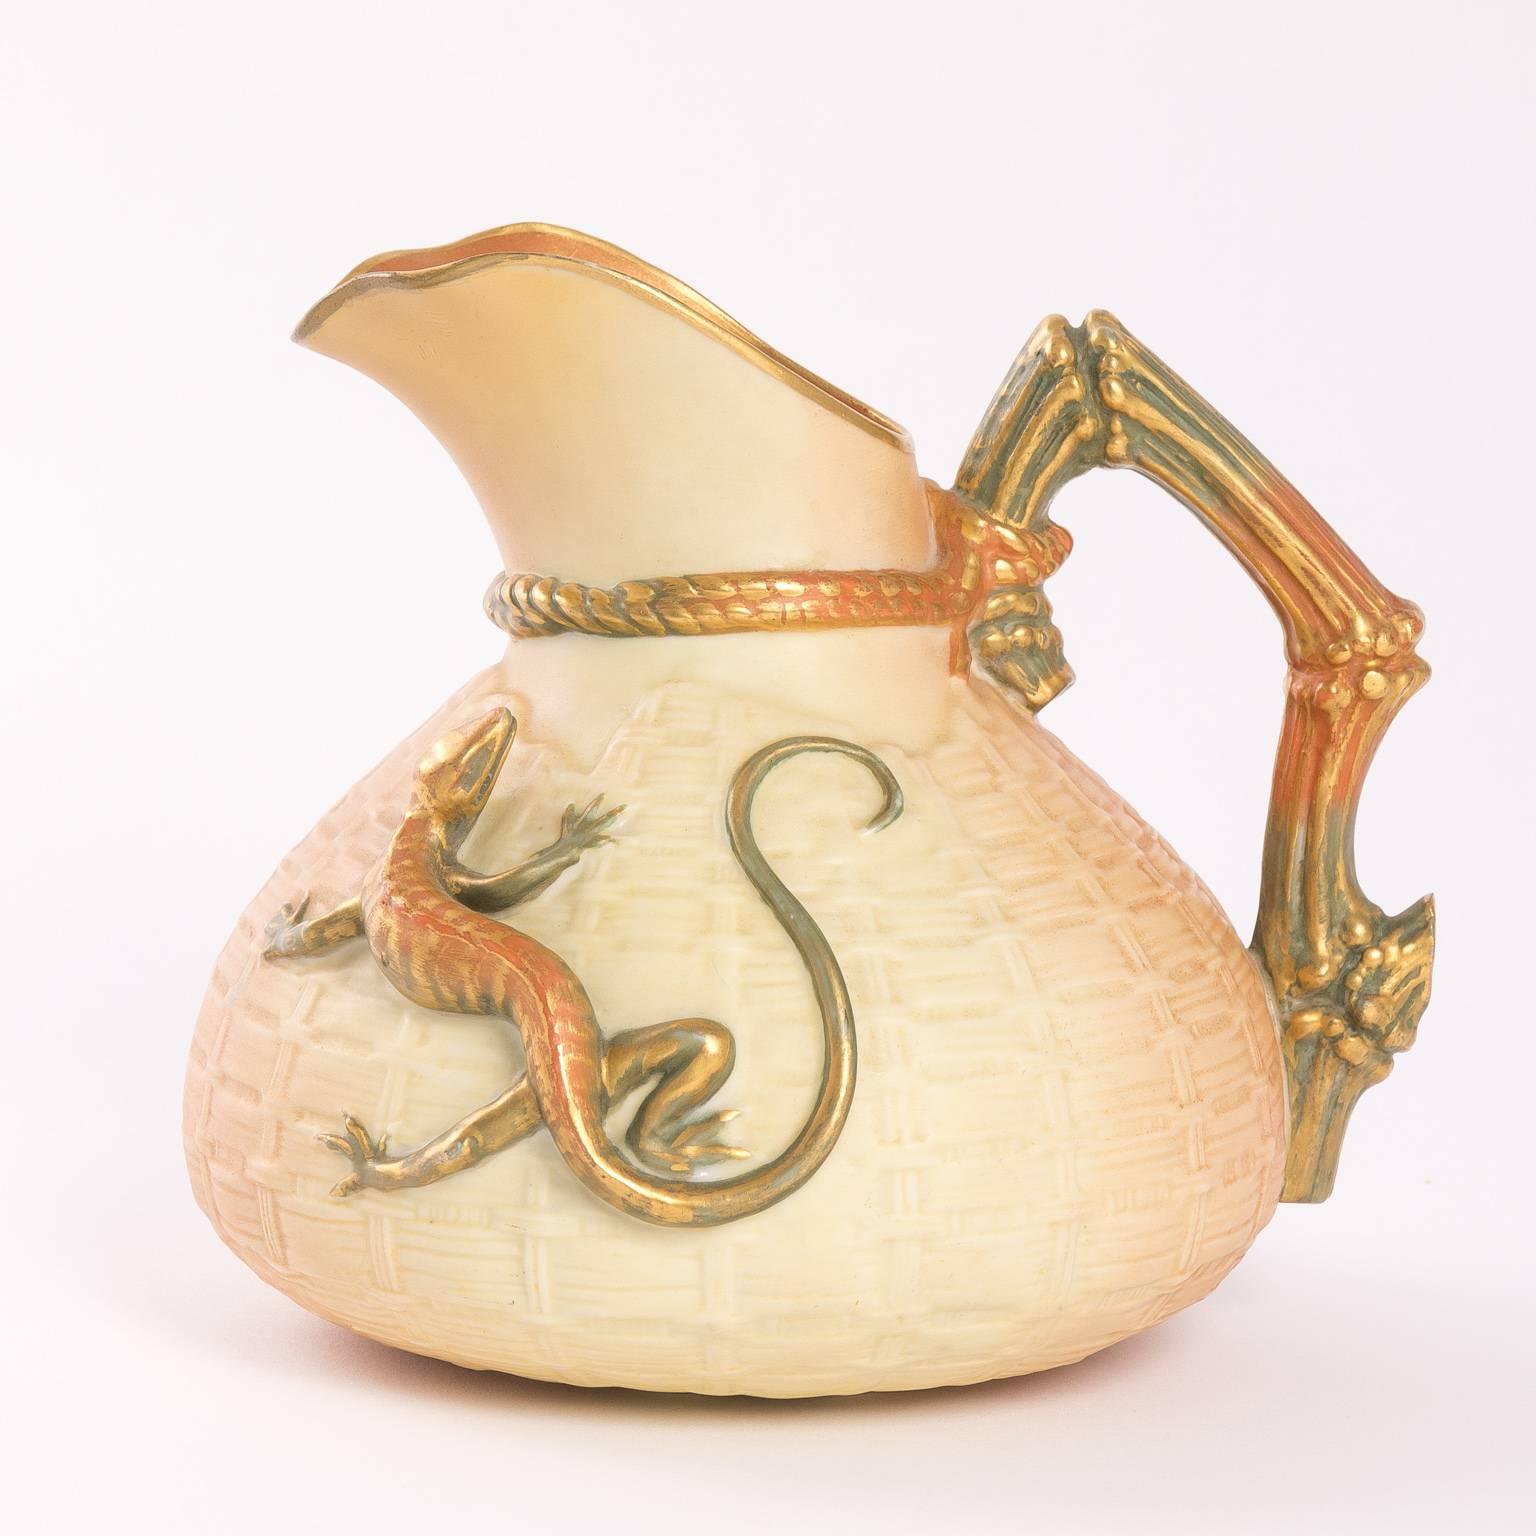 Tall basket weave pattern pitcher with lizard in high relief, circa 1907, England, porcelain
Period: 1890-1920
Styles: Art Nouveau
Materials: Porcelain
Share:
Tear Sheet:
Add to favorites
Add to cart.
  